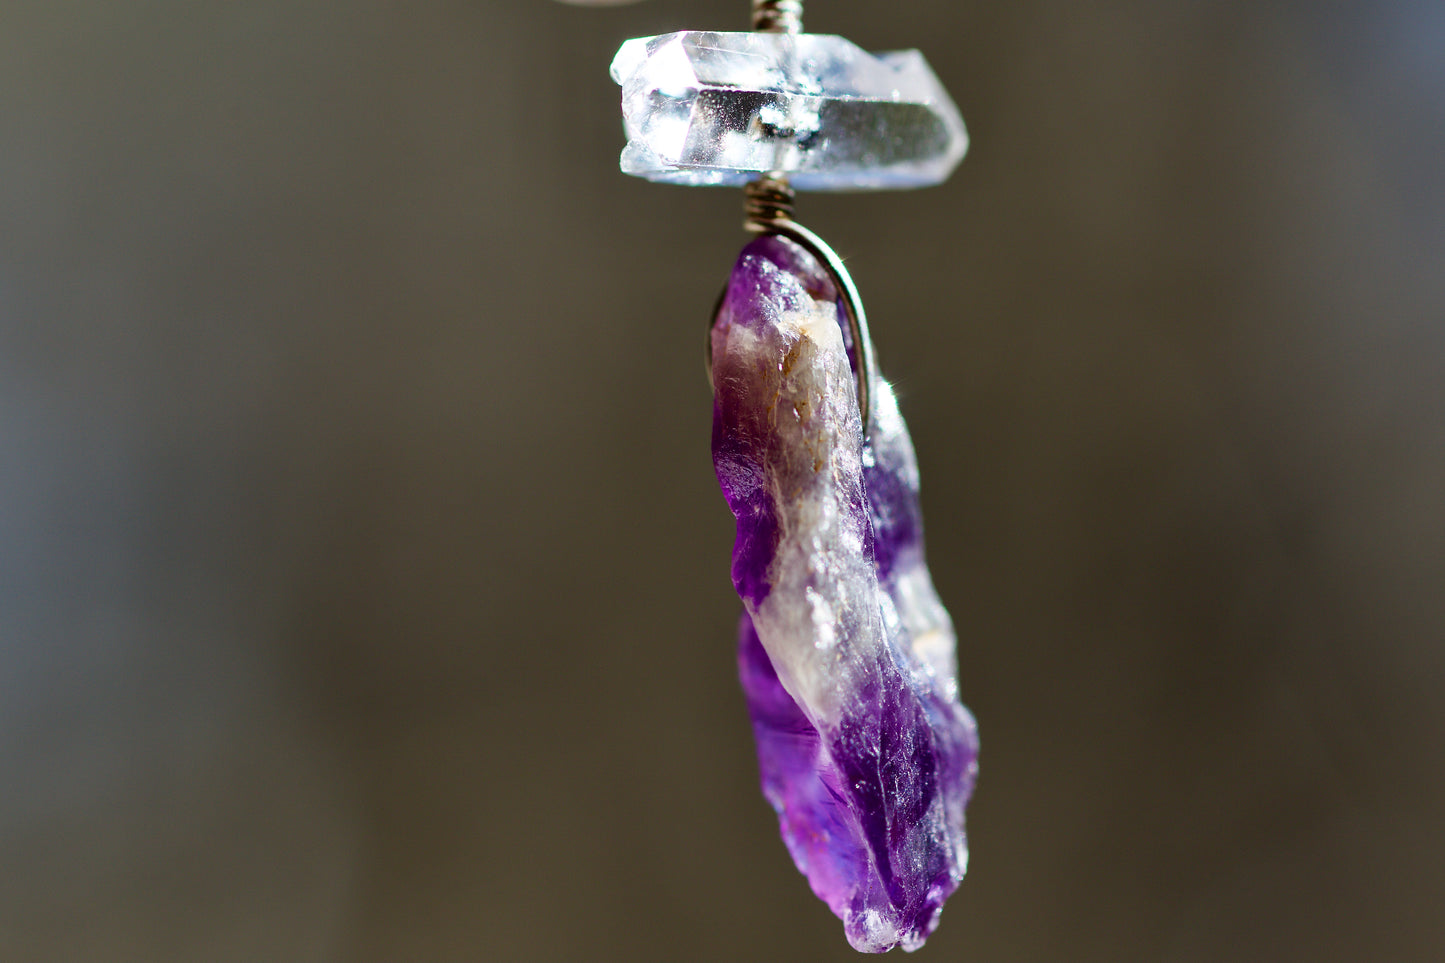 Double Termination Tibetan Clear Quartz Crystal with Black Mineral Inclusions, Raw Amethyst, and Sterling Silver Pendant Necklace